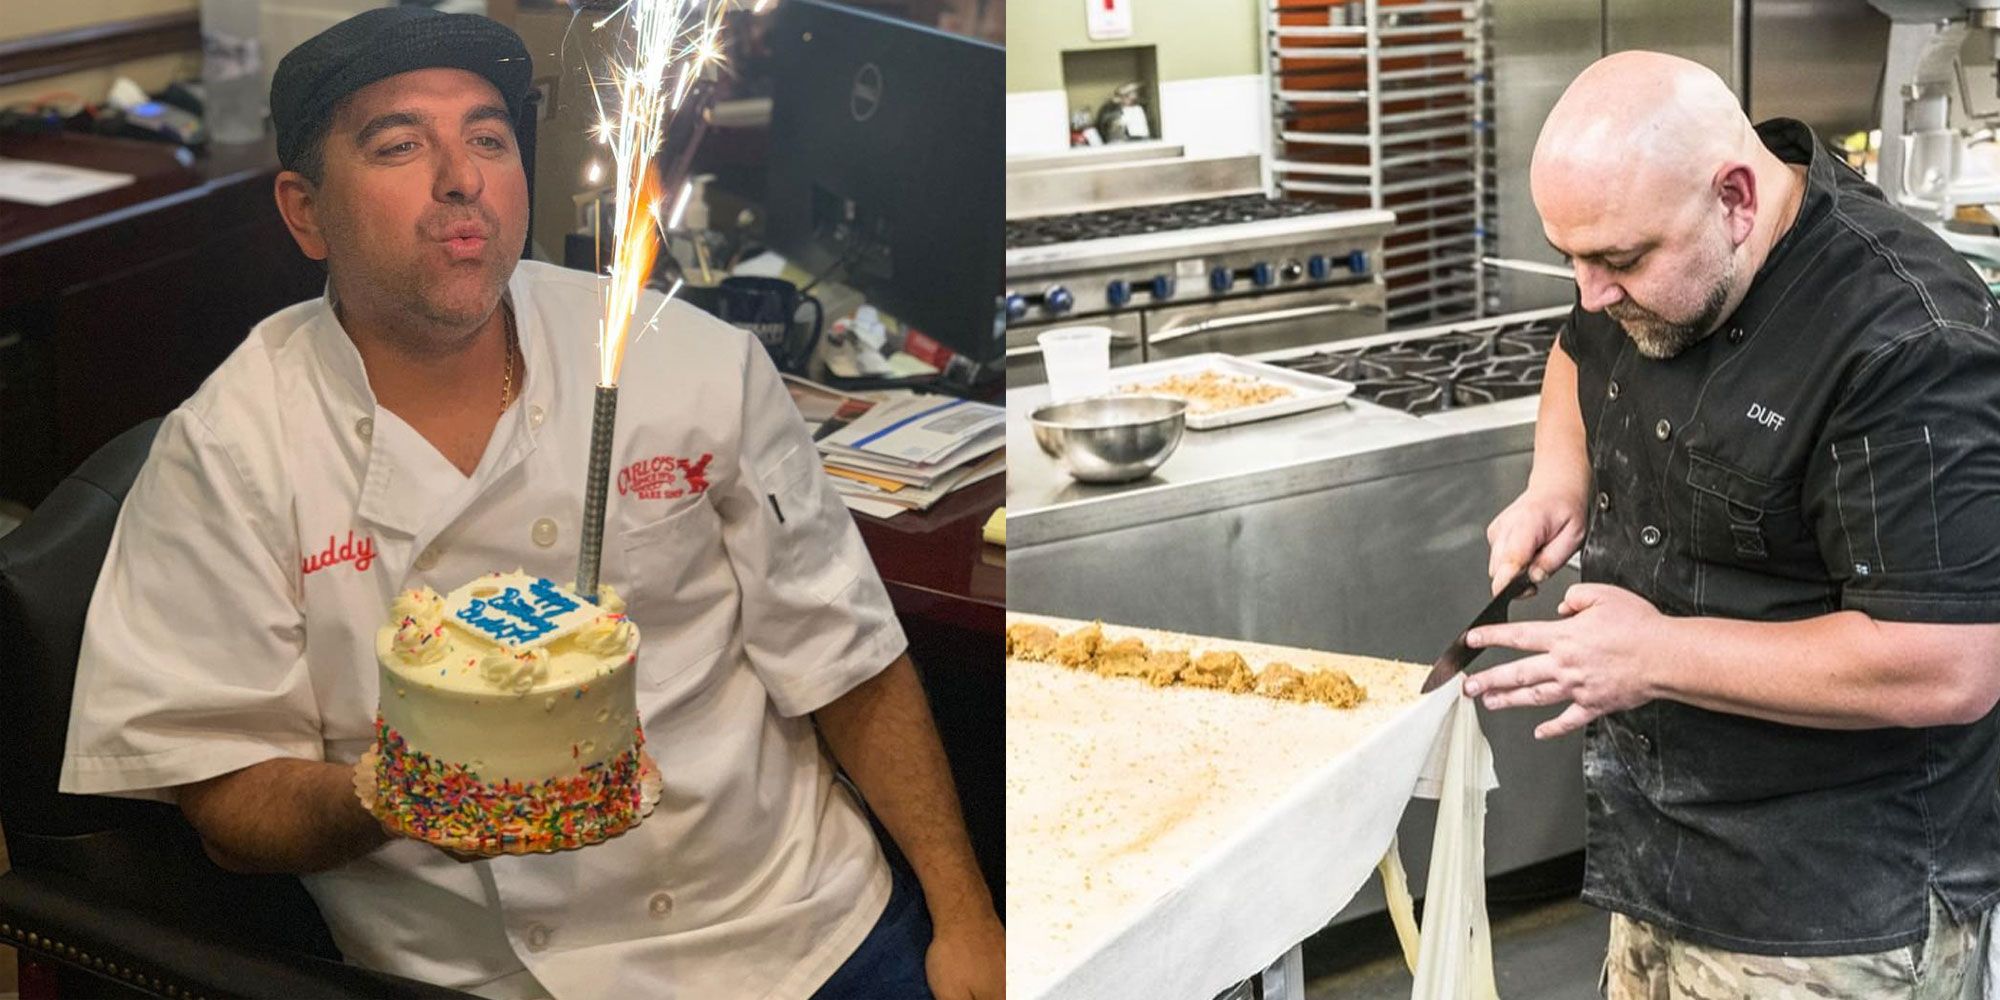 Buddy Valastro And Duff Goldman Discuss Their New Network Show - Buddy Vs. Duff